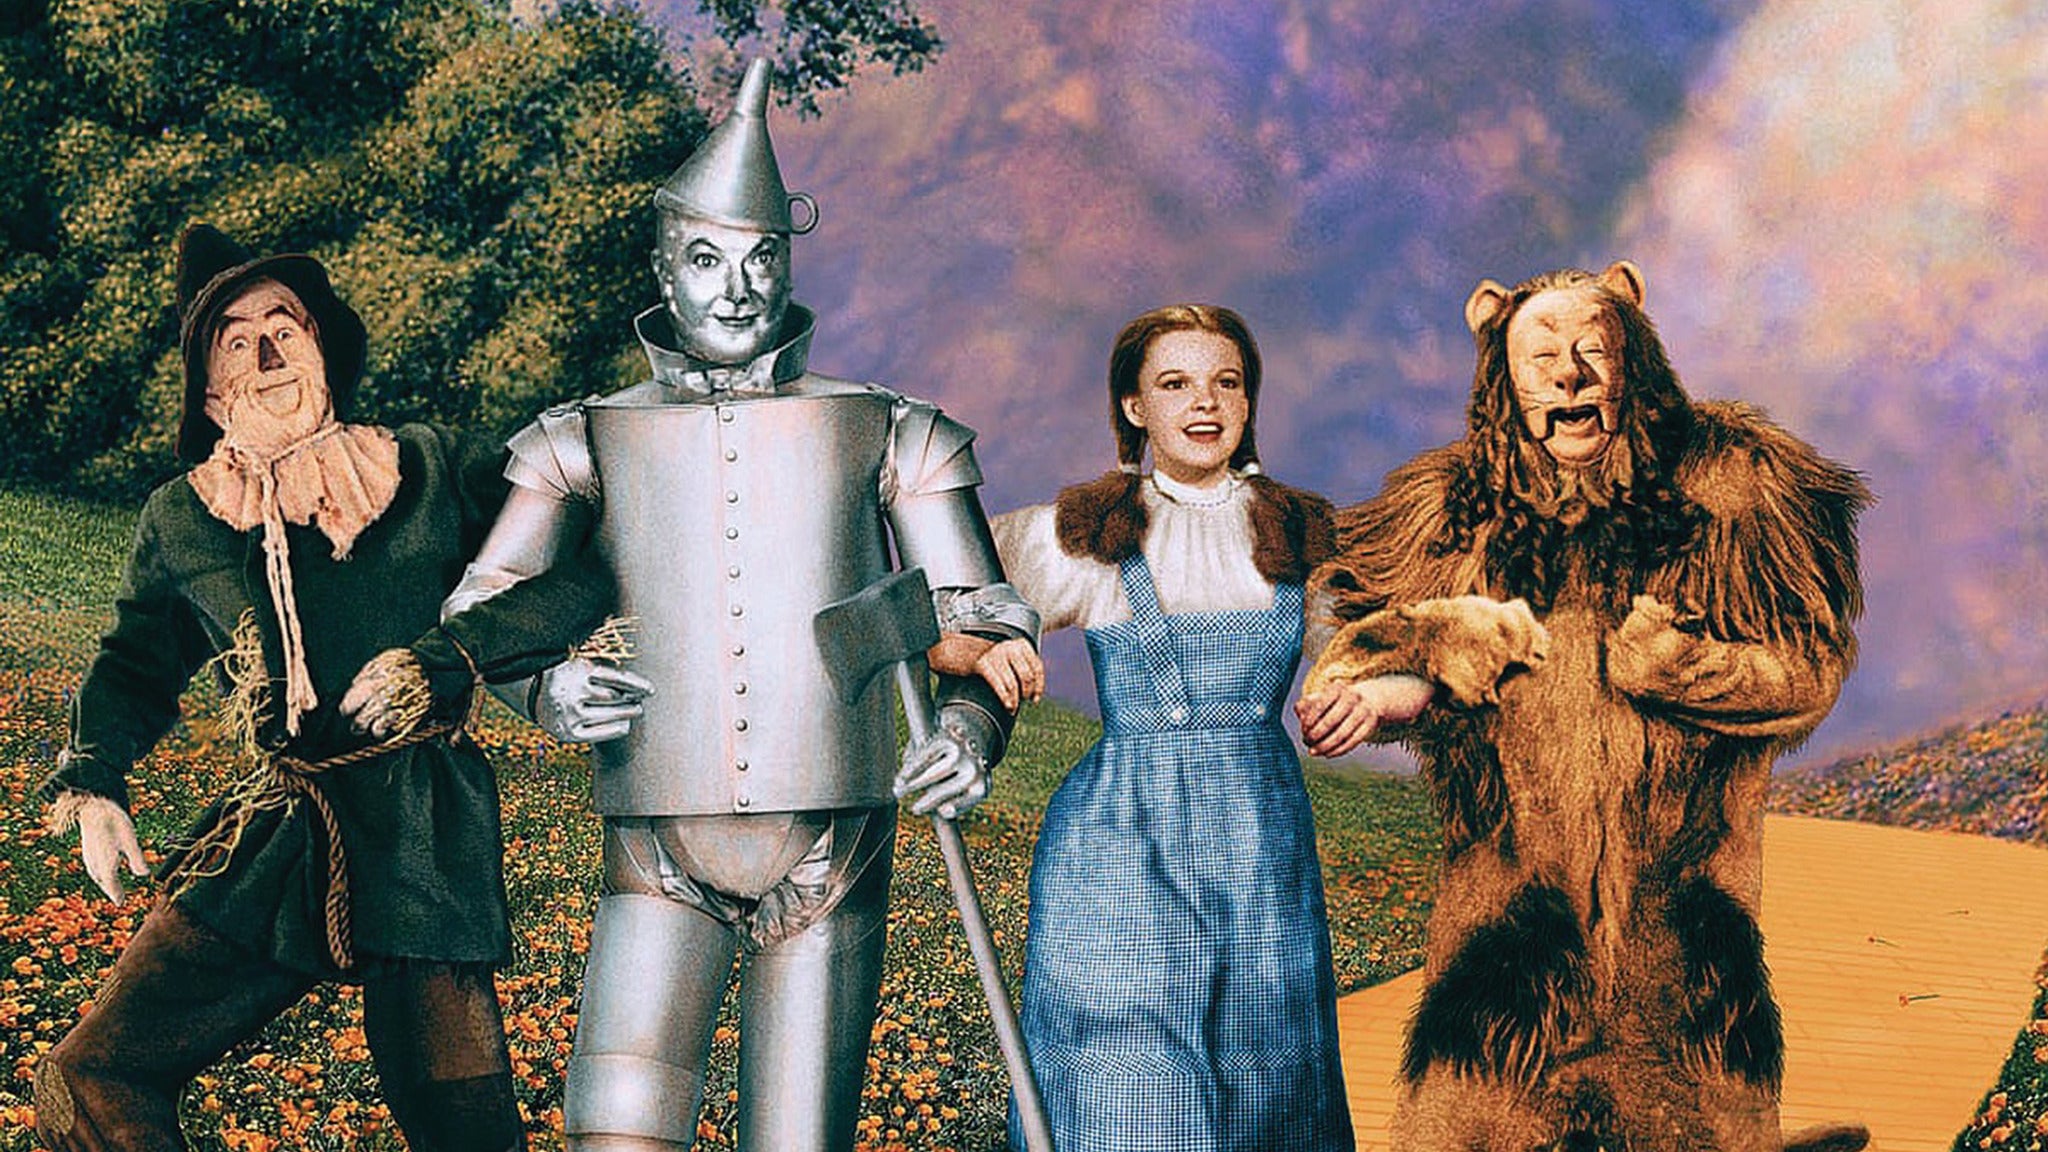 Wizard of Oz in Lafayette promo photo for Facebook presale offer code